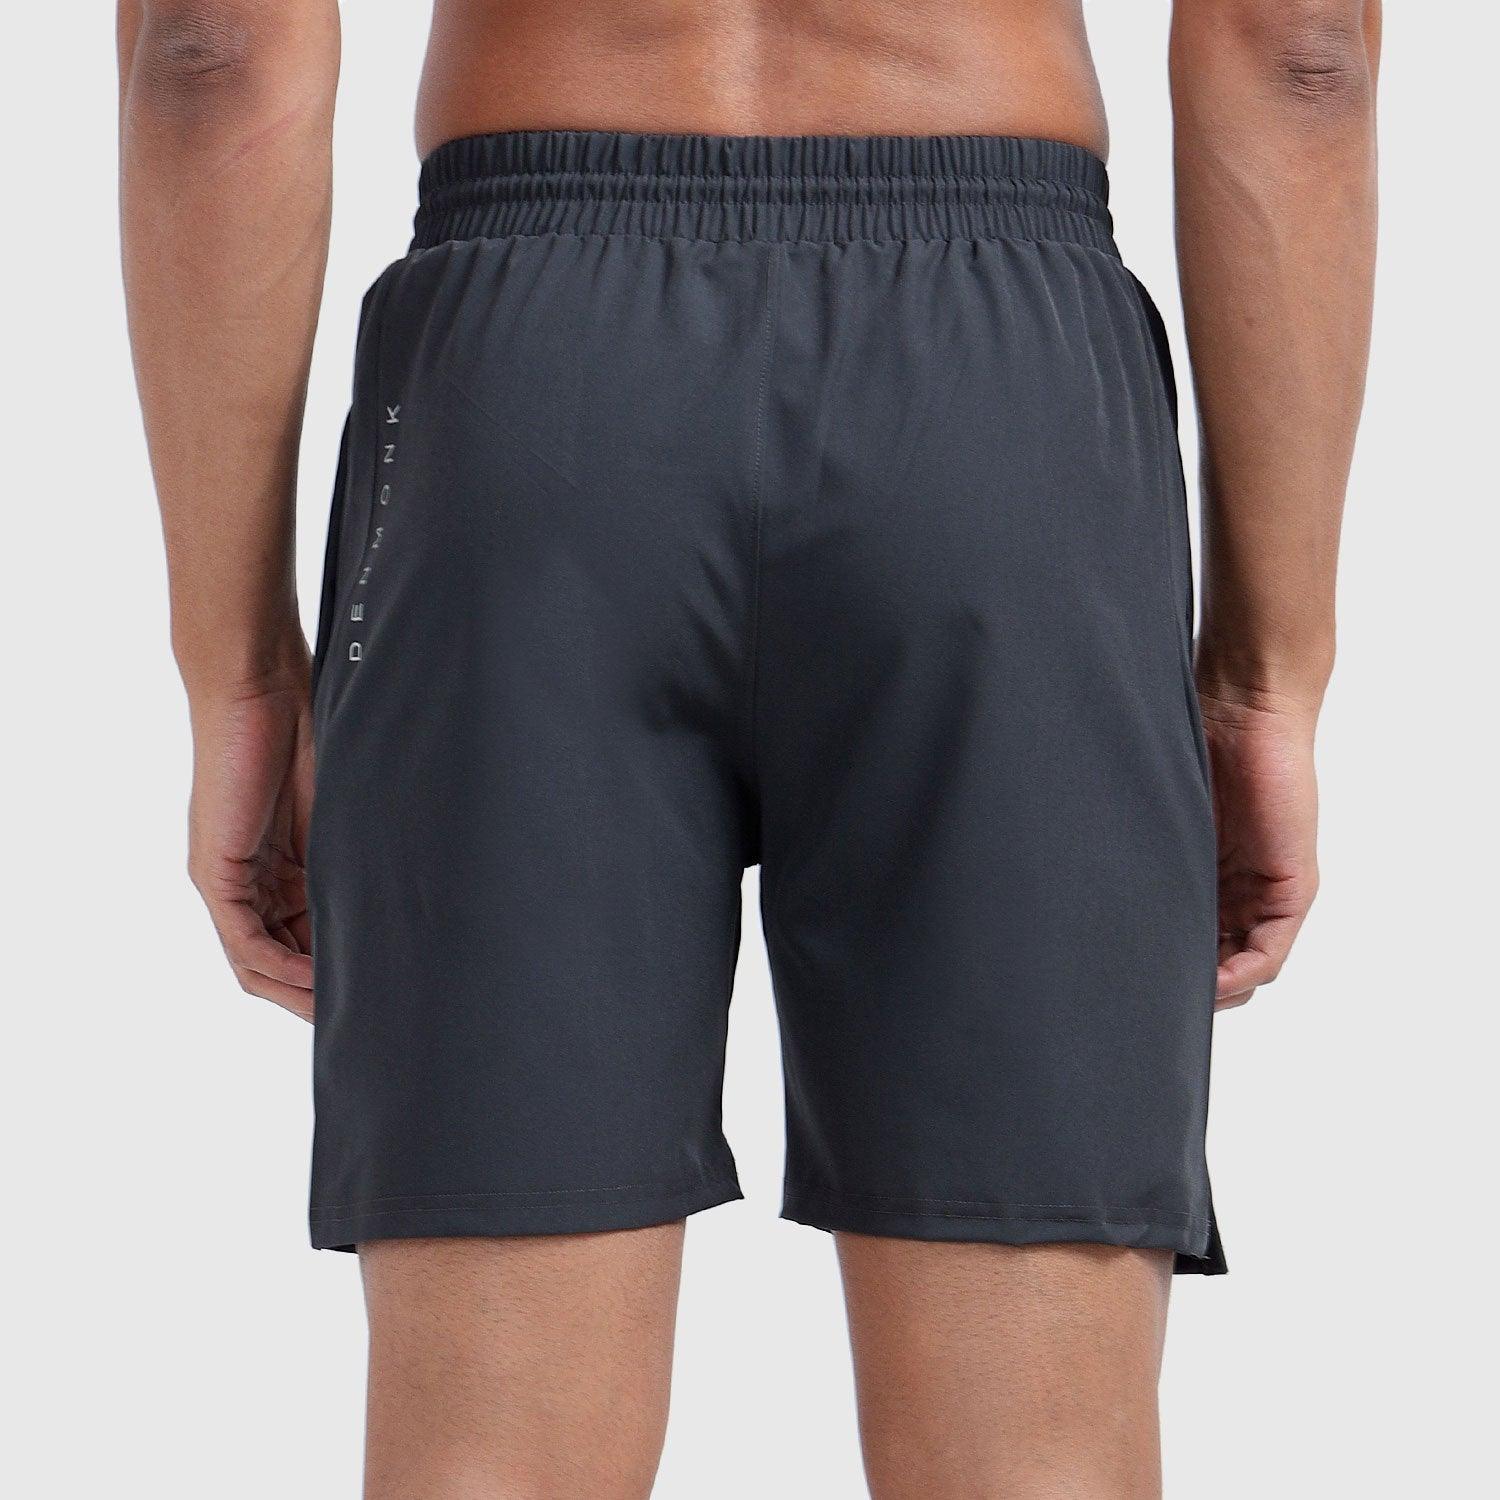 Denmonk's fashionable Coastline Comfort charcoal shorts for men will boost your level of gym fitness.